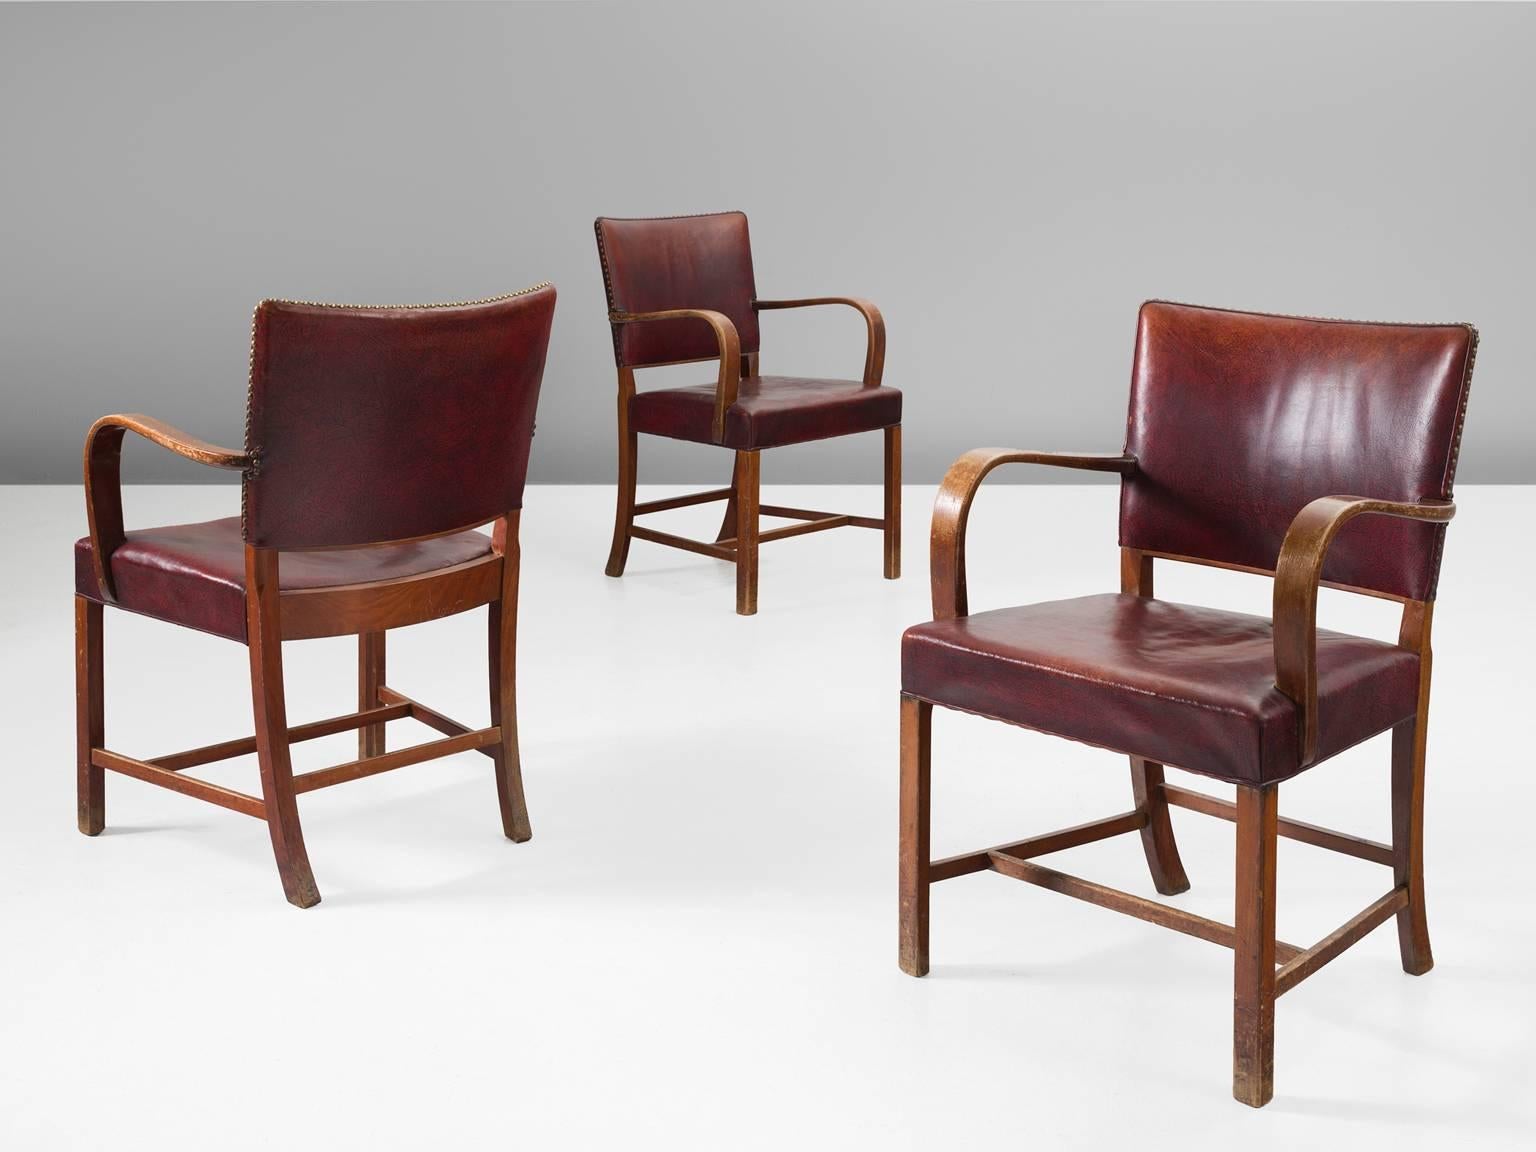 Fritz Hansen, dining chairs, beech and red leather, Denmark, 1940s.

These chairs are strong and sturdy. They seem almost proud about their appearance. These chairs once served on board of the ship Aegir. The combination of the material, the top